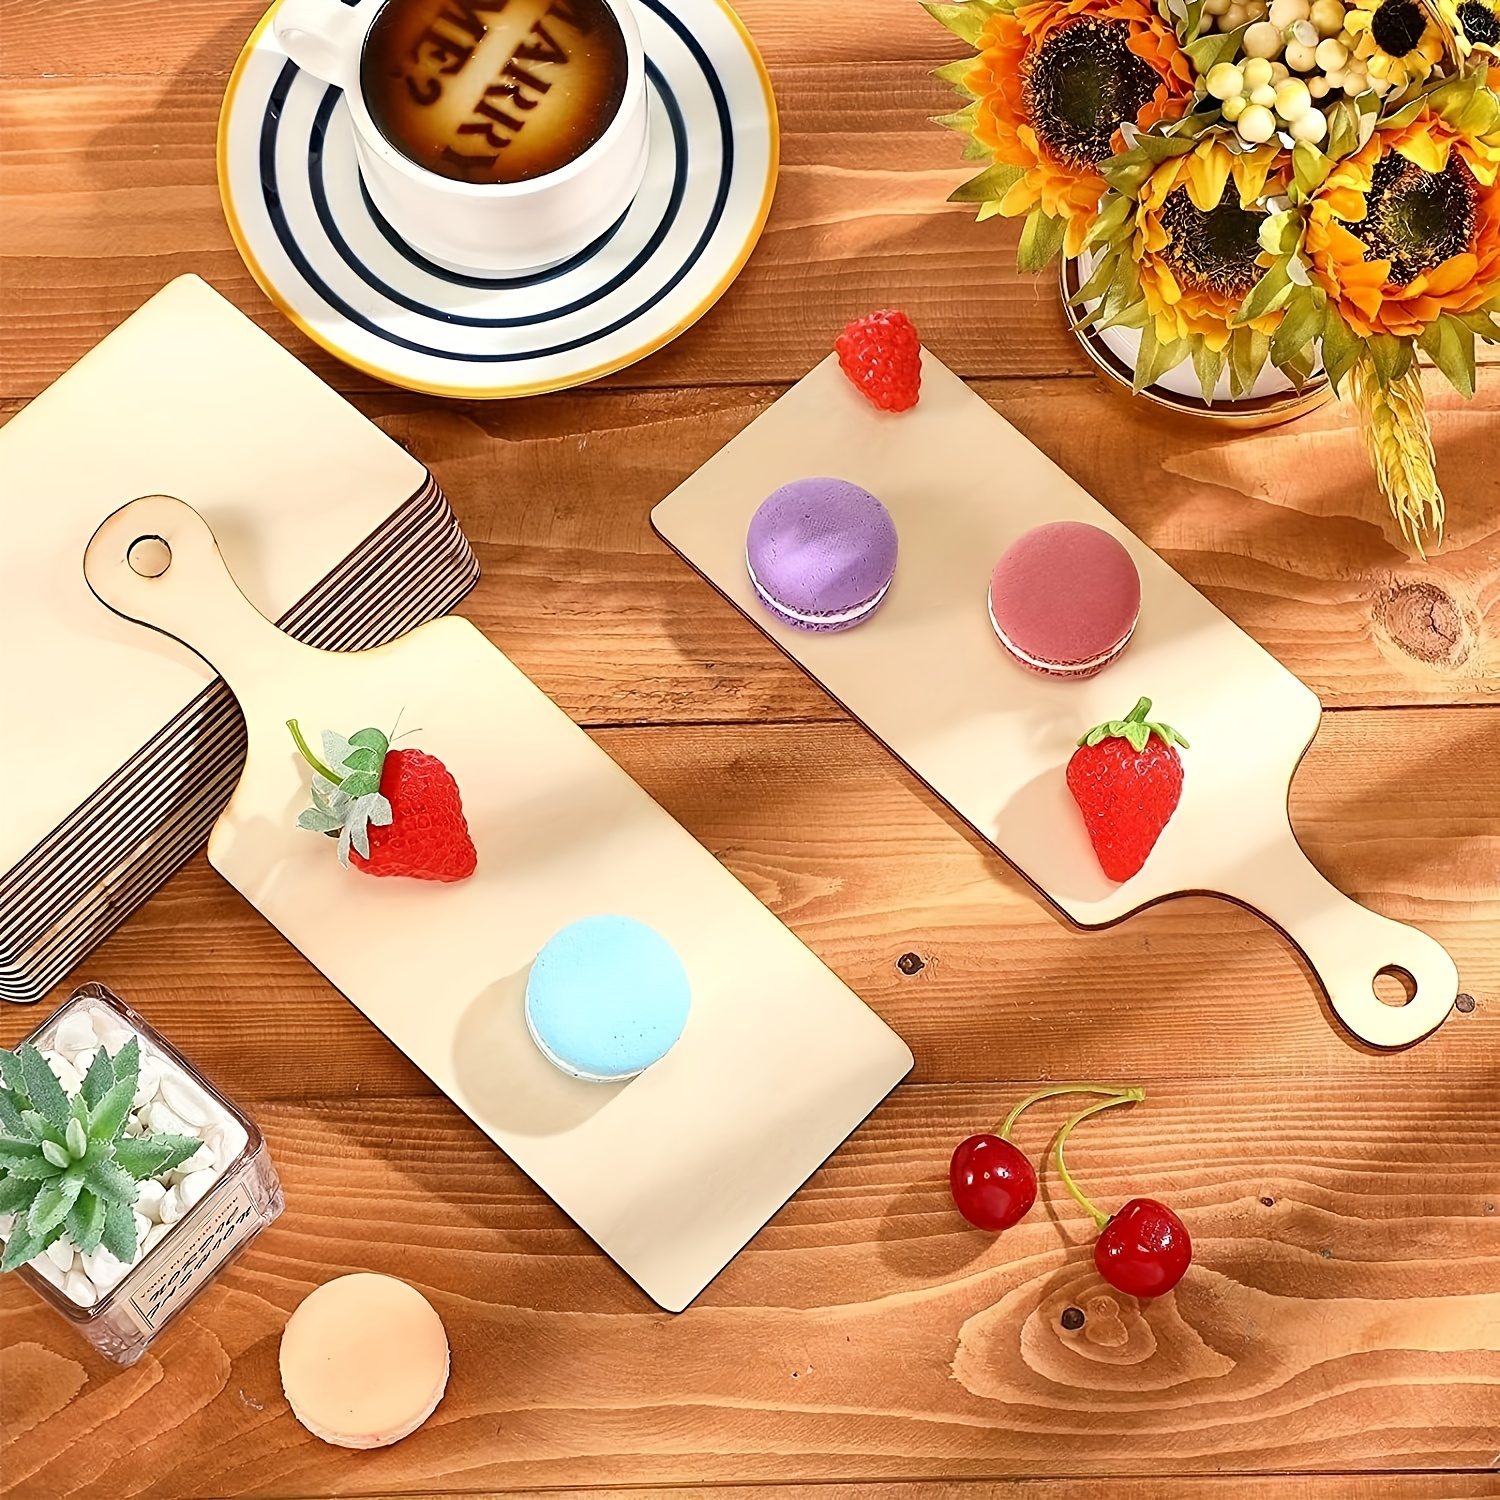 Marsui 12 Pieces Mini Wooden Cutting Board with Handle Valentine's Day  Small Chopping Board Craft Wooden Paddle Board for DIY Kitchen Home  Decor(9.4 x